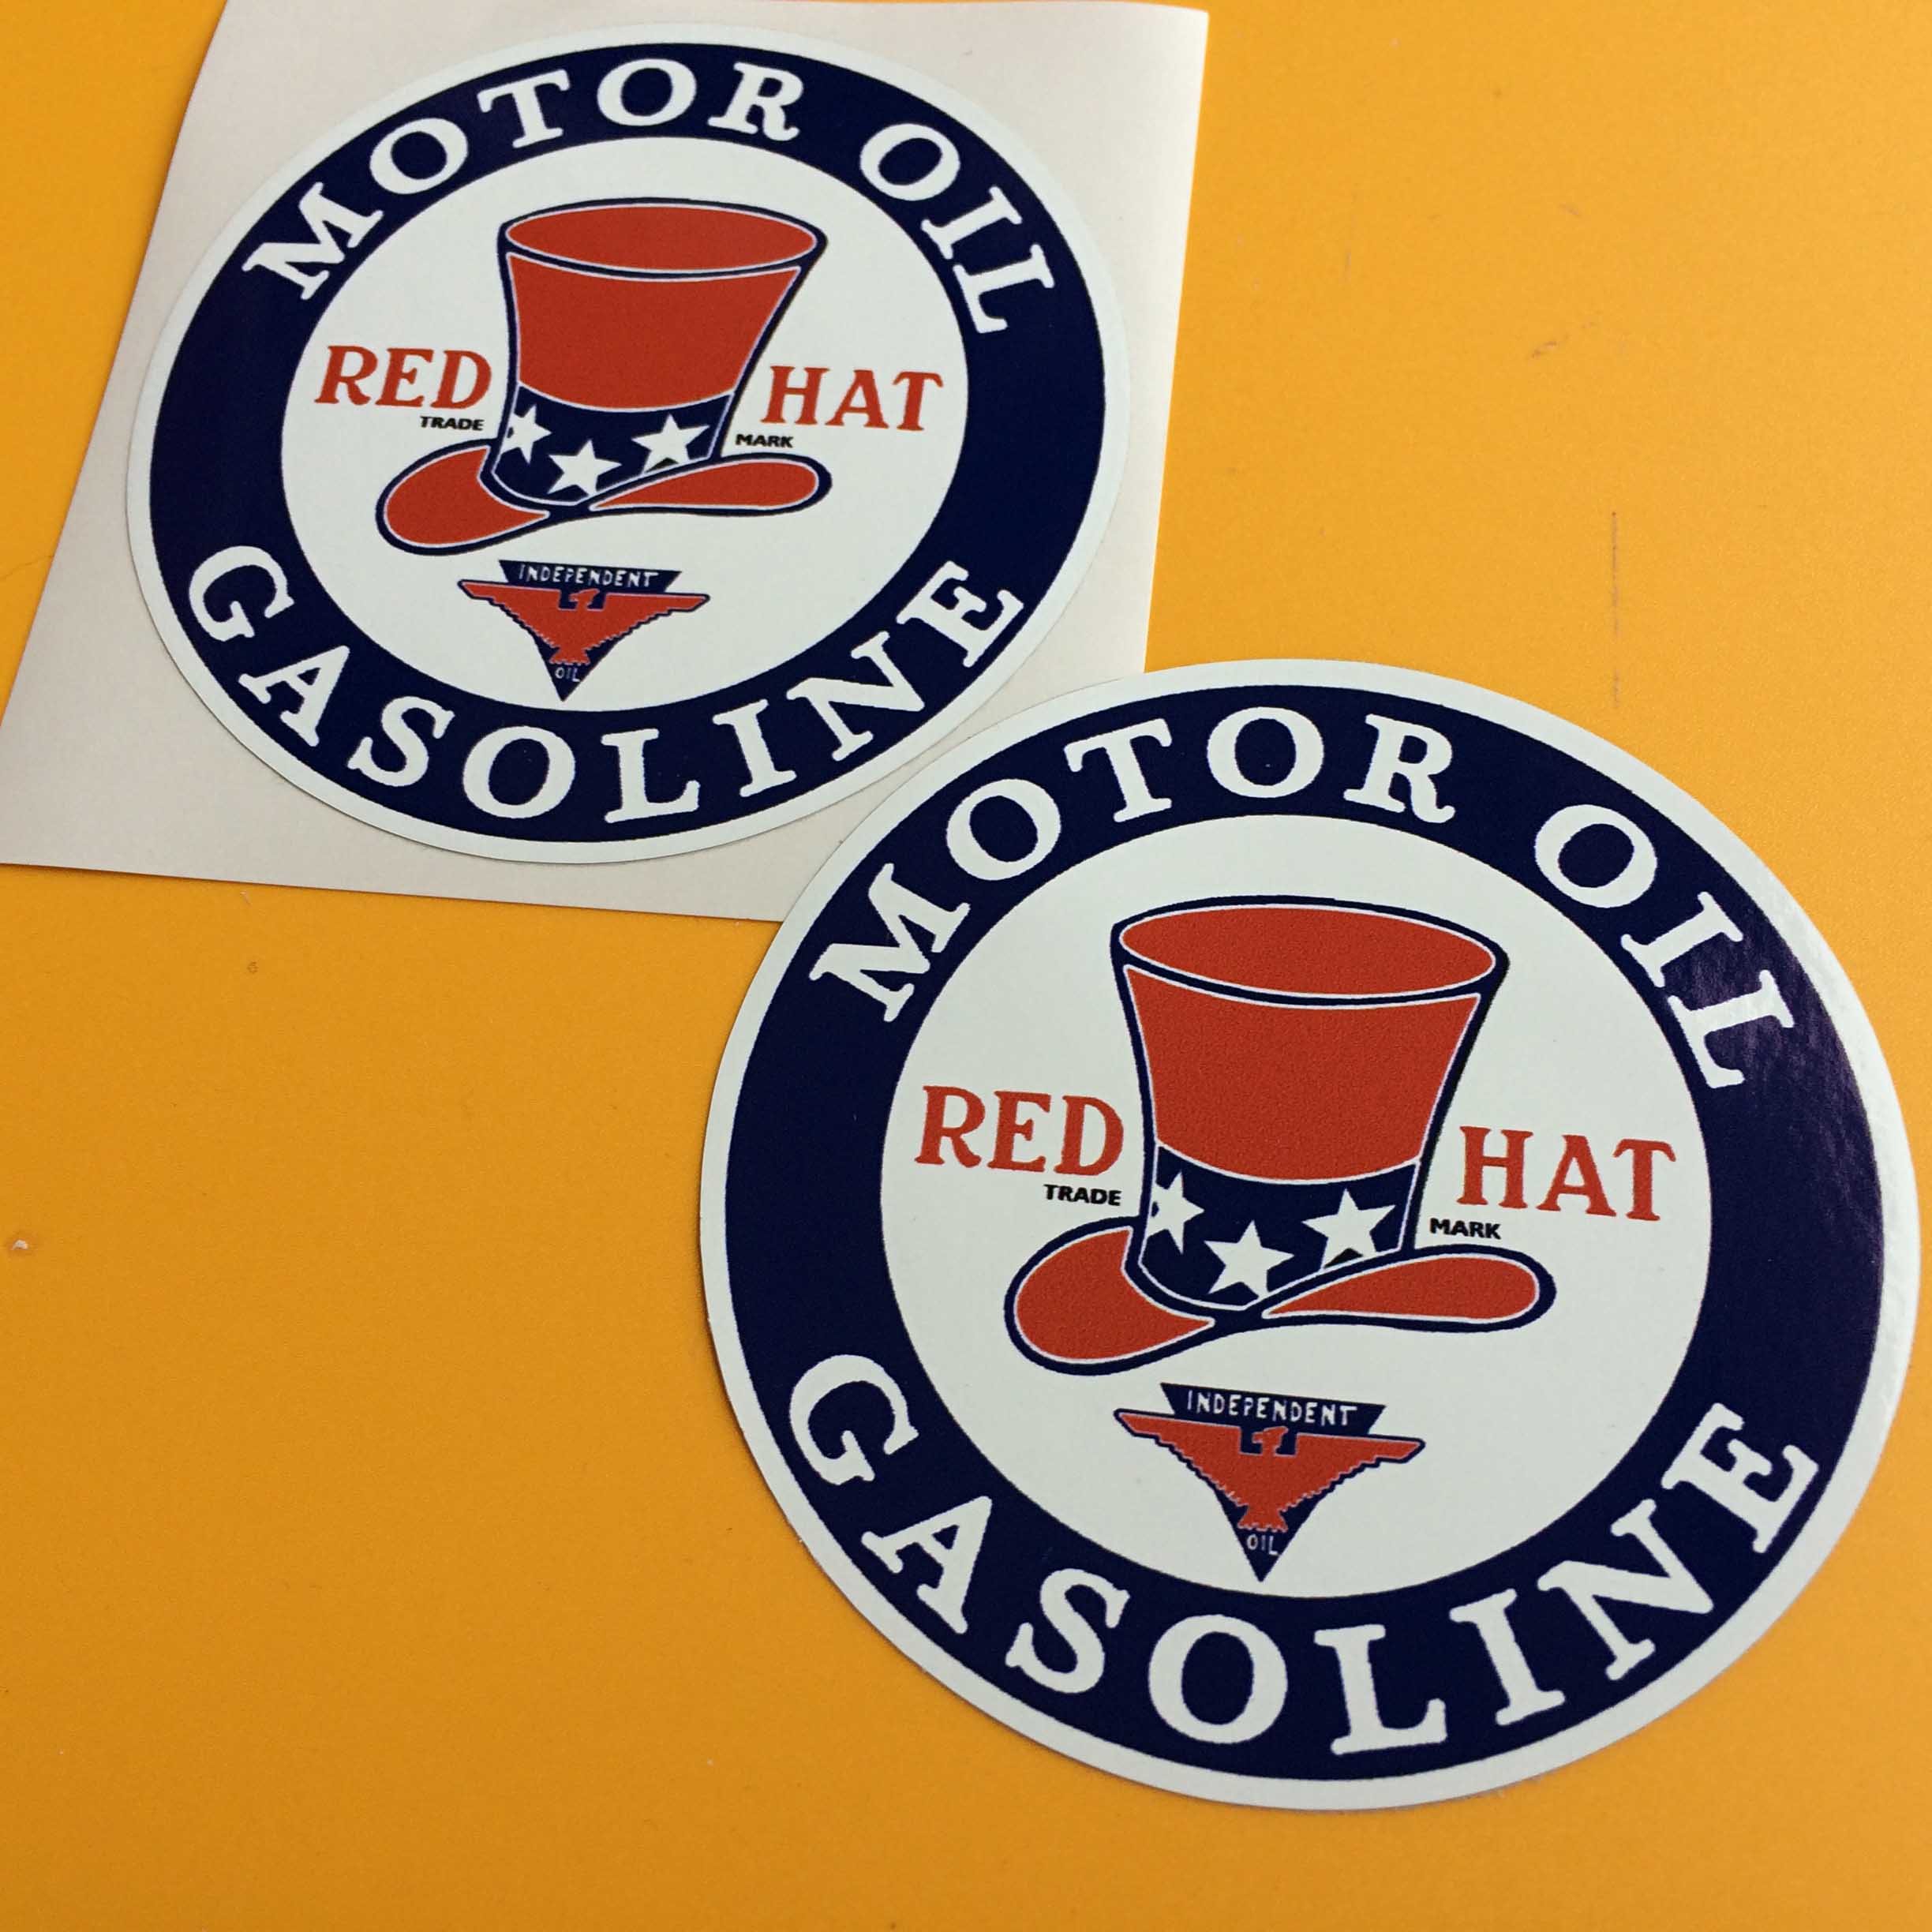 Red Hat Motor Oil Gasoline surrounds a patriotic top hat inside two concentric circles of blue and white. Below the hat is a red eagle and Independent Oil on a blue flipped triangle.